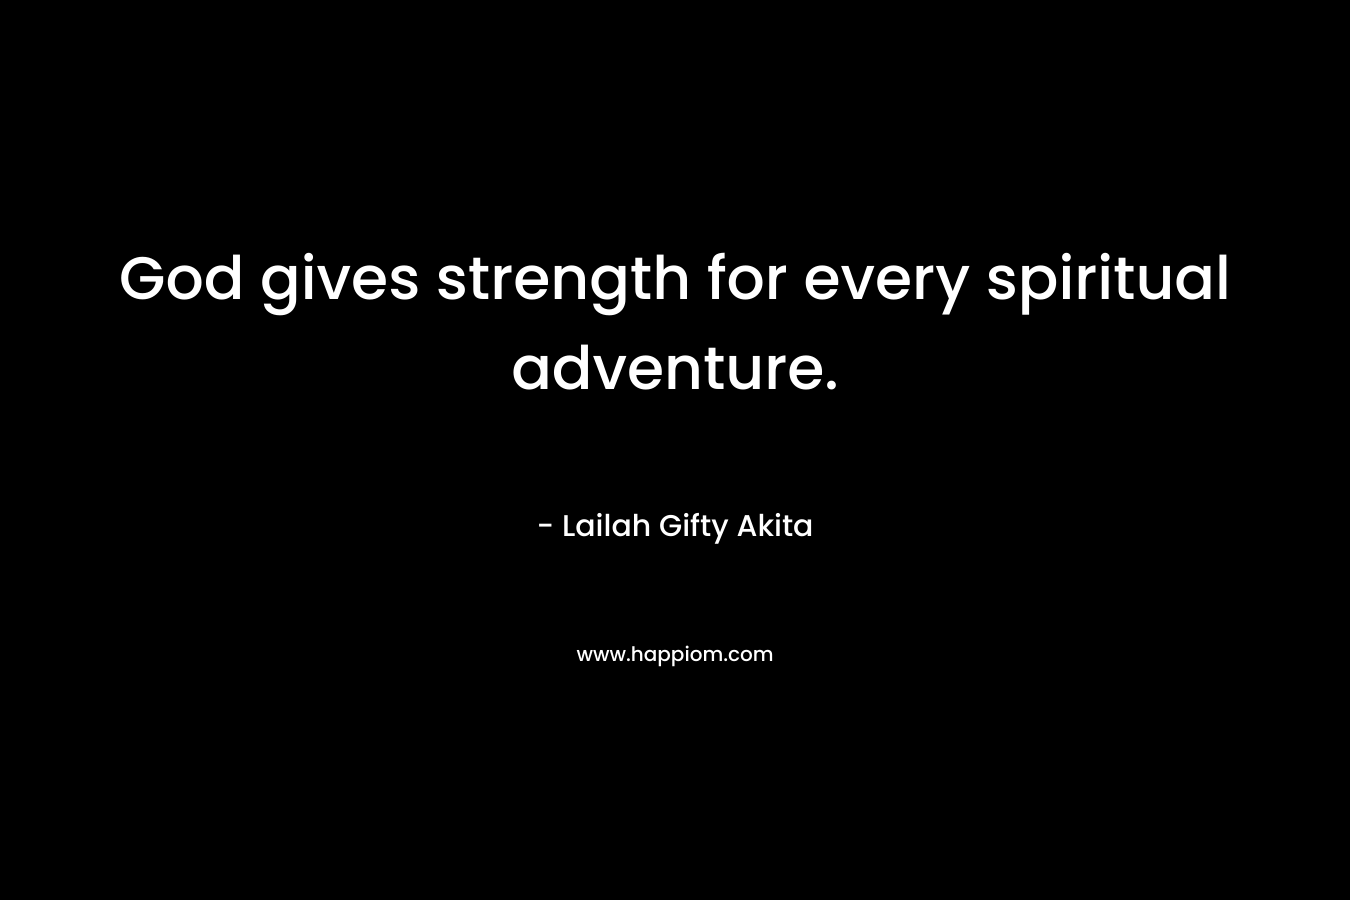 God gives strength for every spiritual adventure.